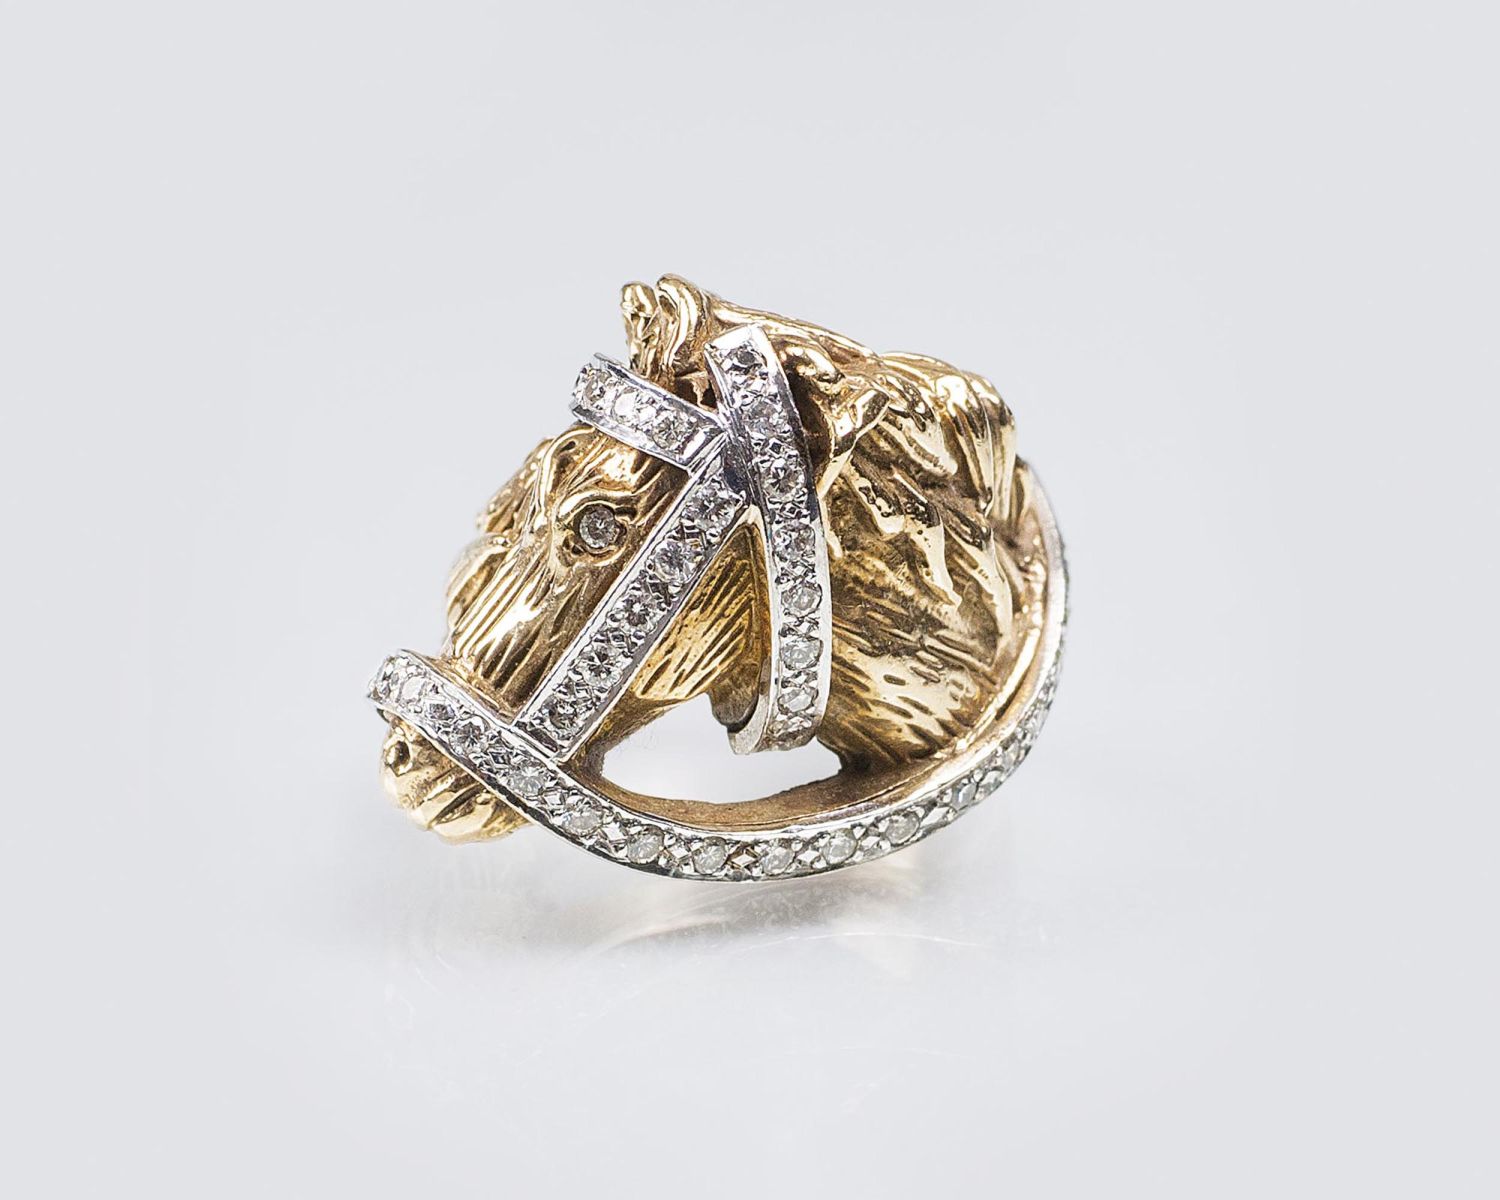 A Gold Ring 'Horse' with Diamonds